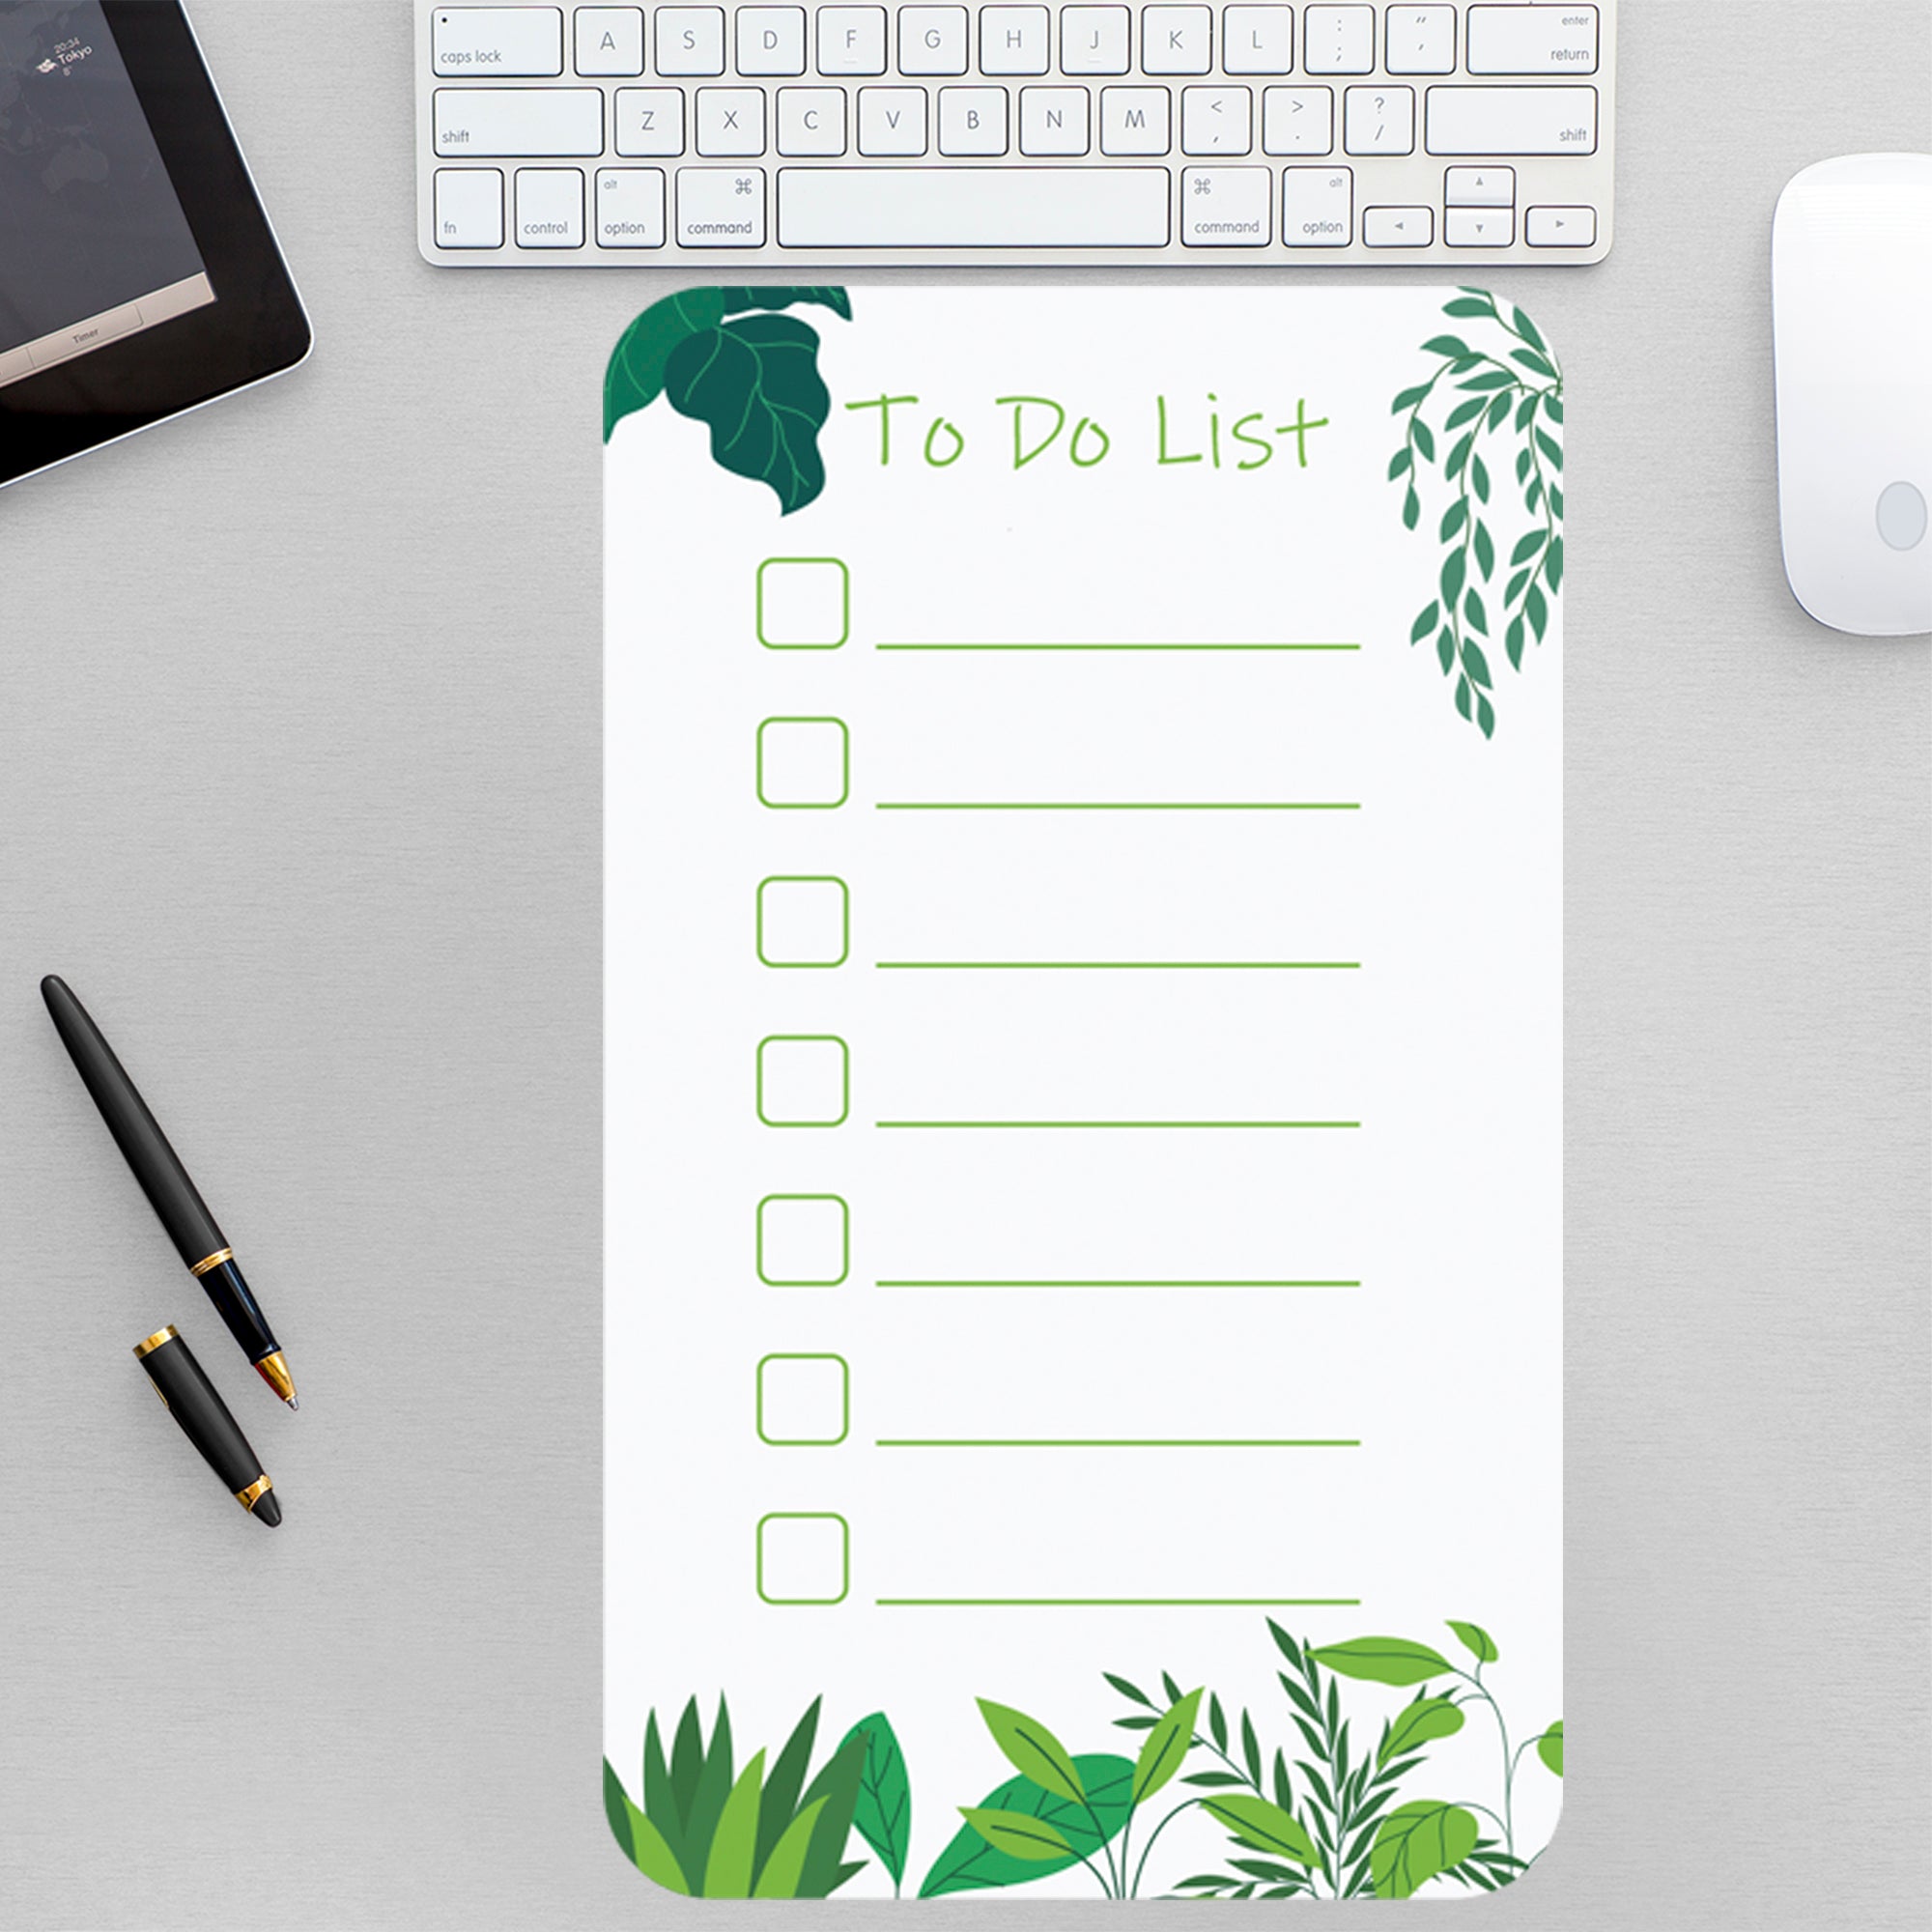 To Do List Plants - Removable Wall Decal Large by Fathead | Vinyl